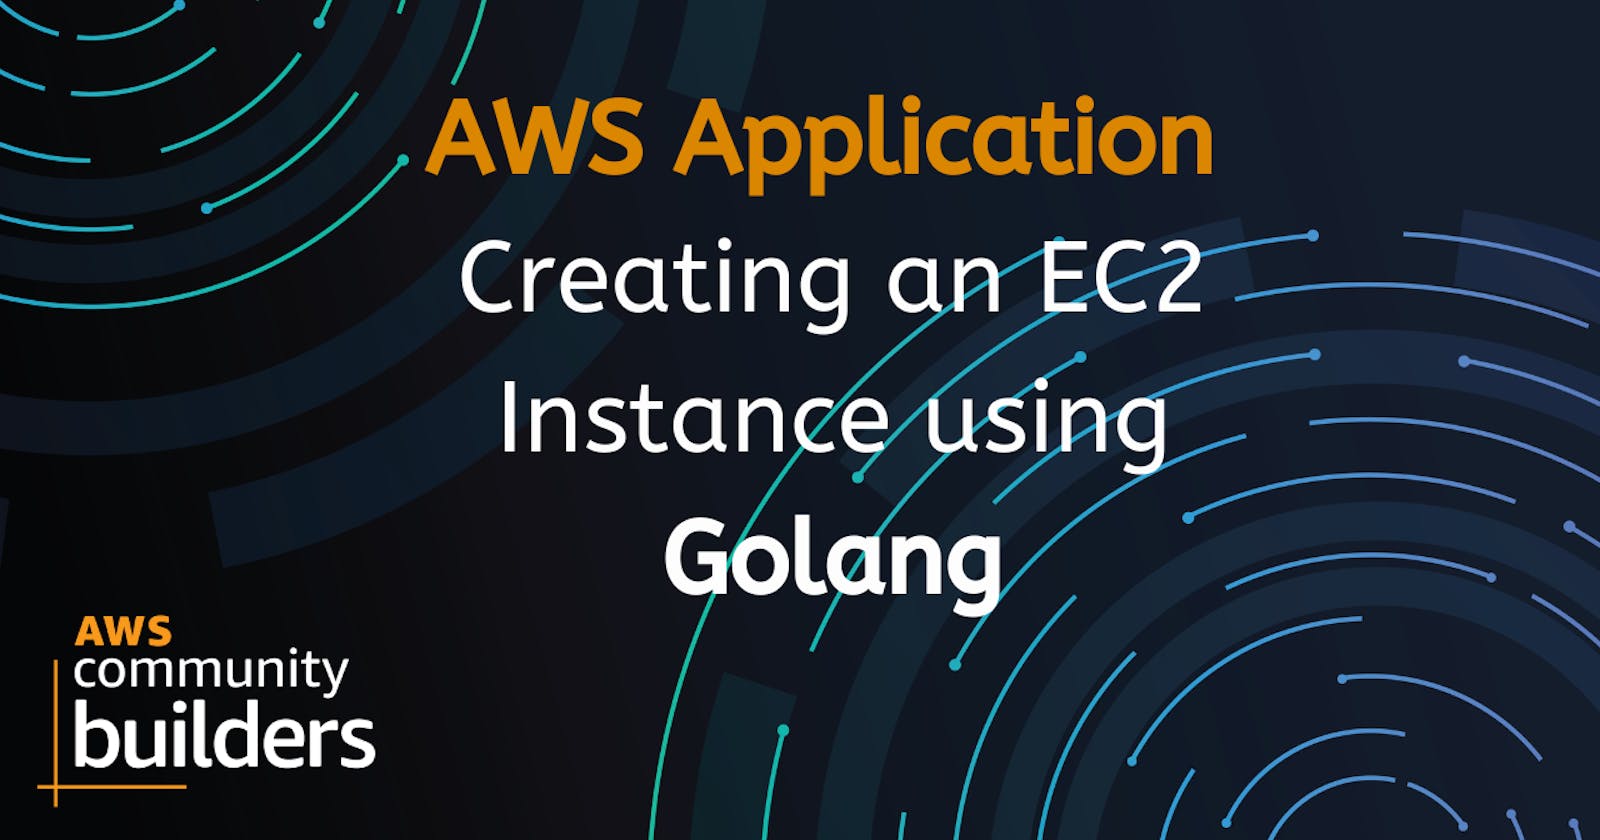 Creating an EC2 Instance in AWS using Go: A Step-by-Step Guide